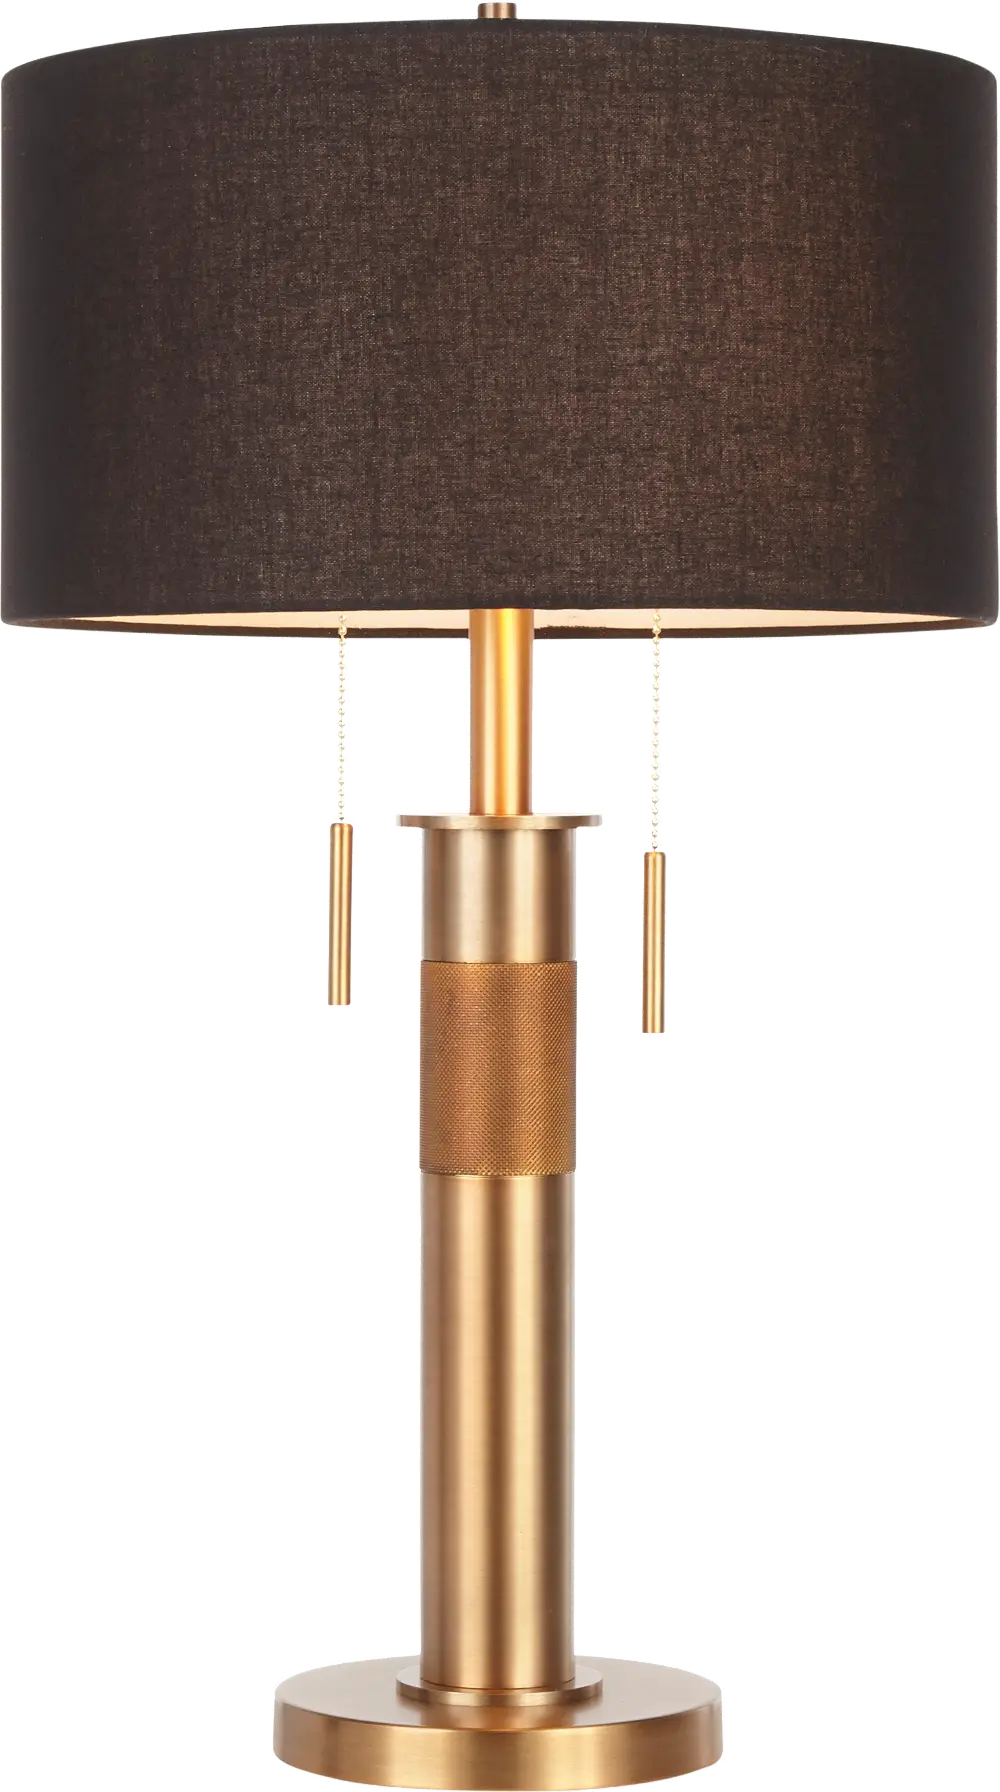 LS-TROPHTL-ABBK Antique Brass Industrial Table Lamp with Black Shade - Trophy-1